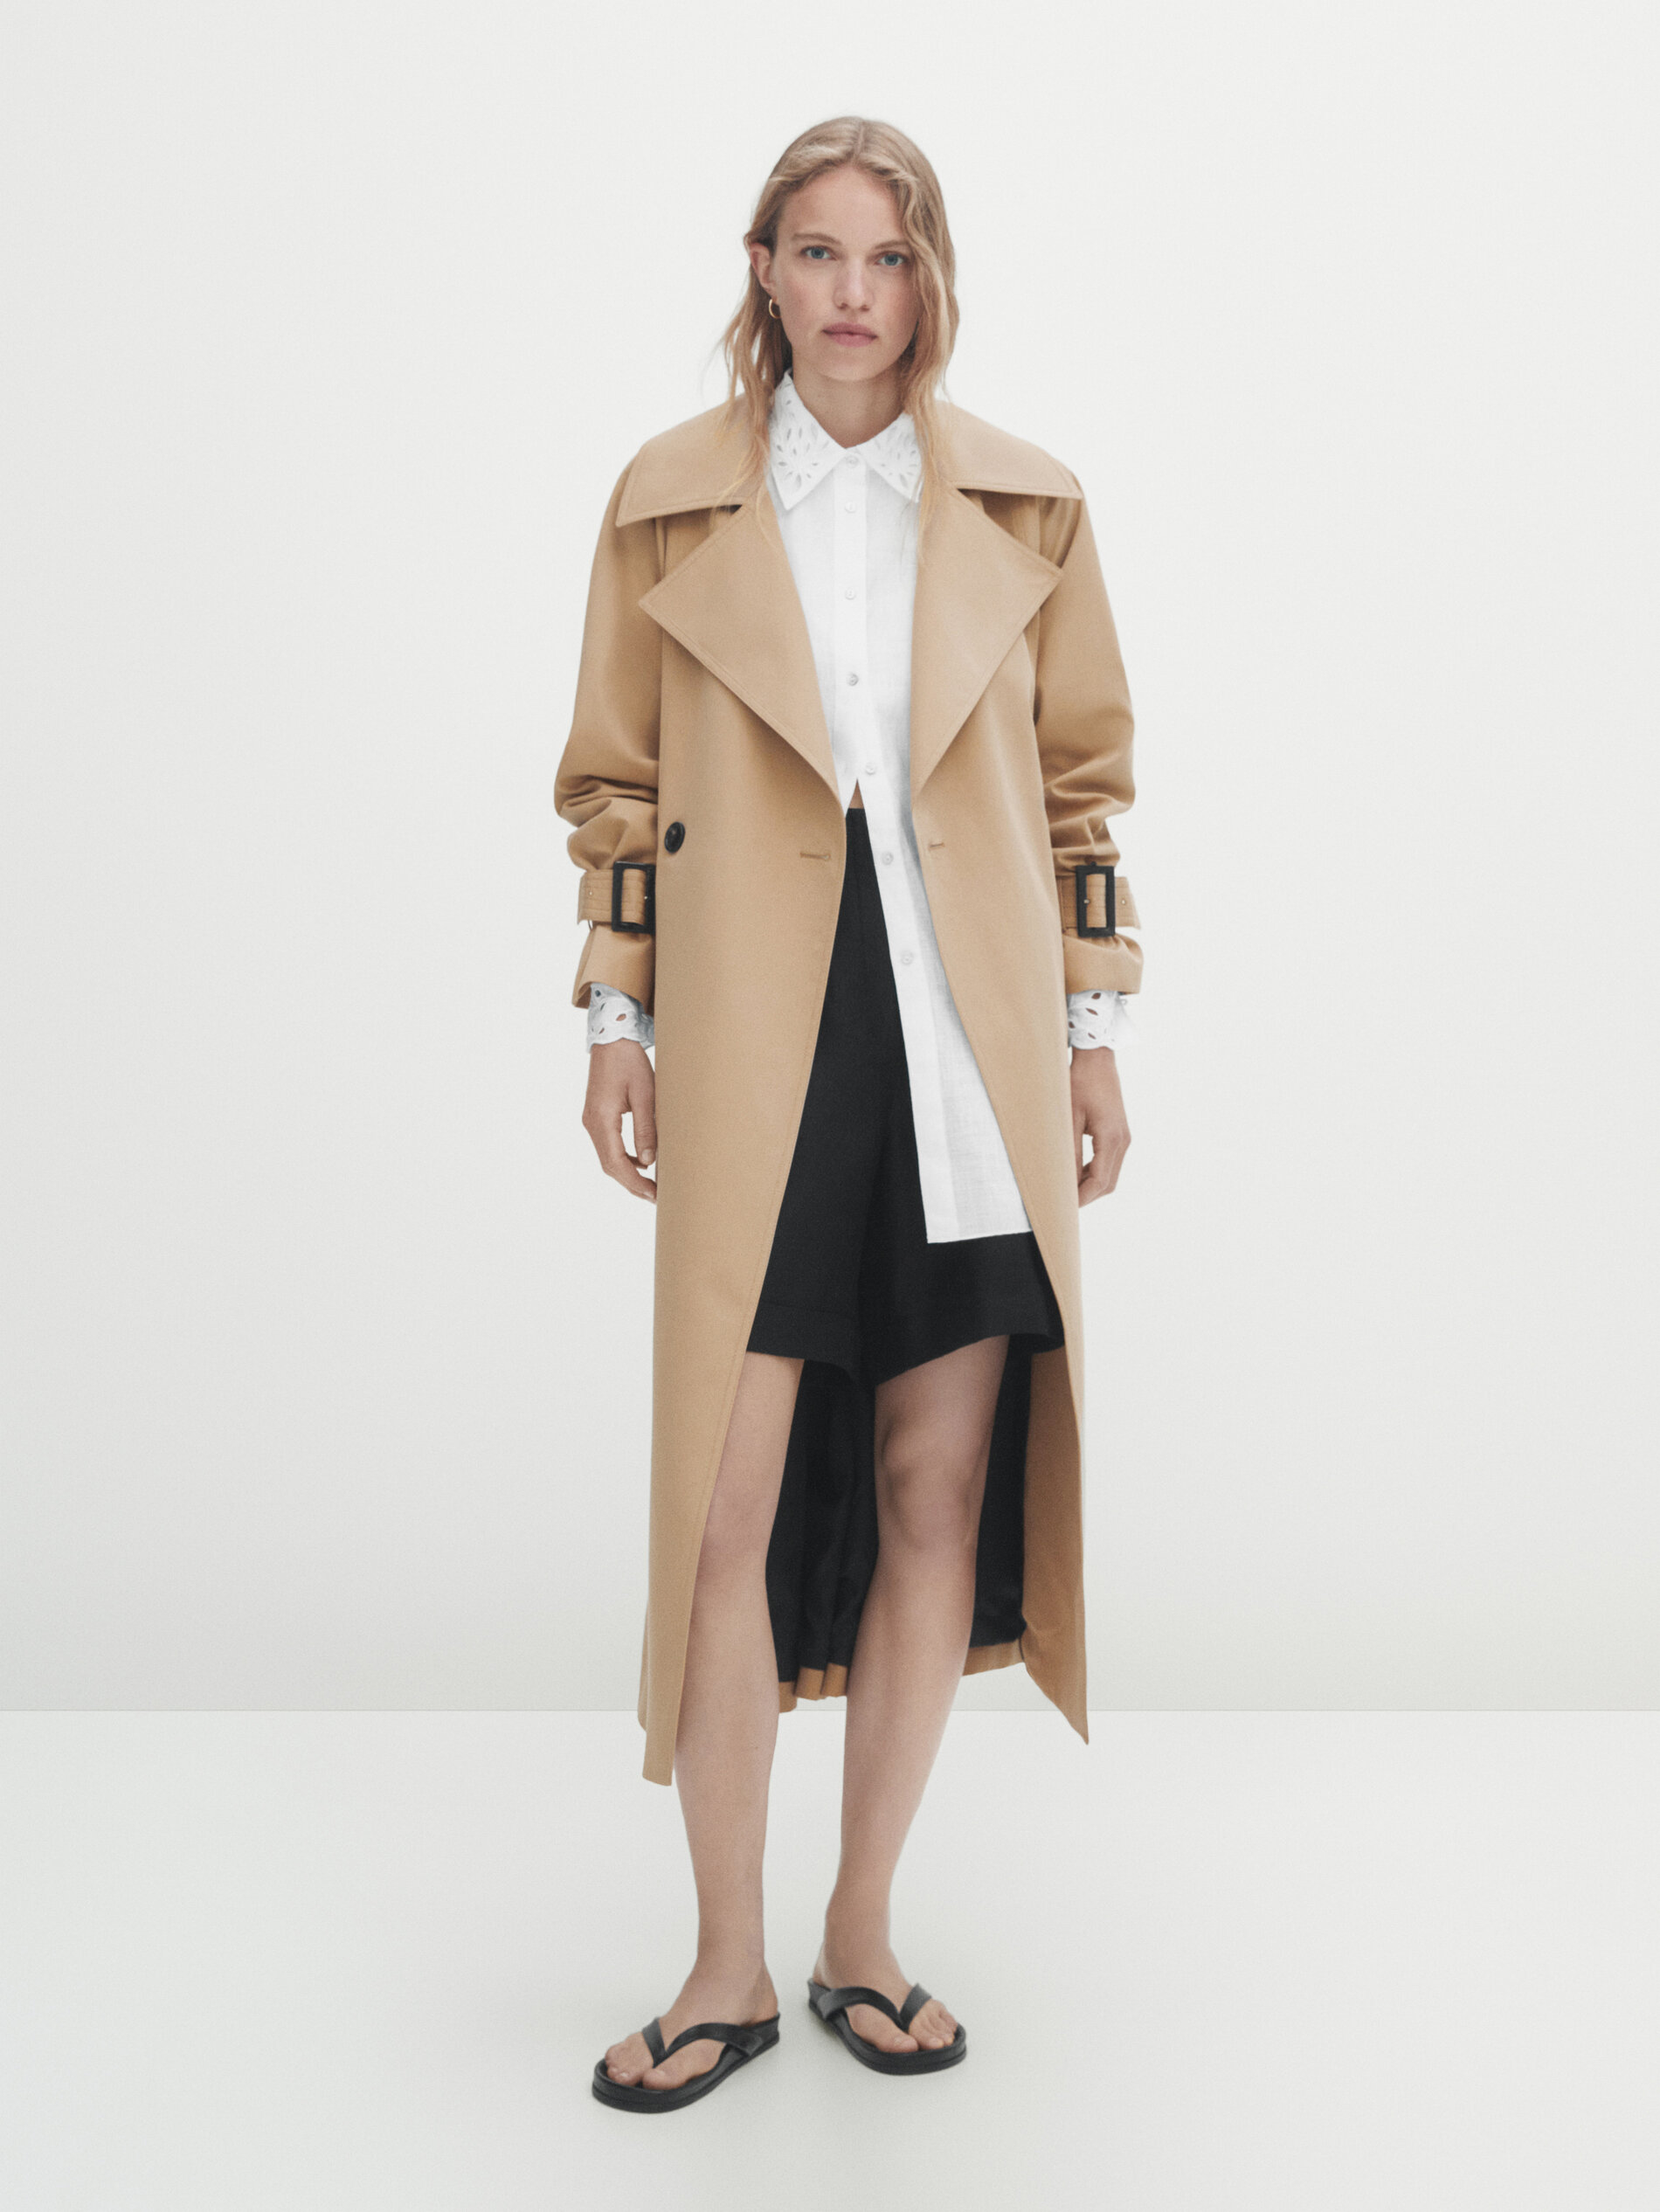 Massimo Dutti Loose-Fitting Trench Coat With Belt - Big Apple Buddy